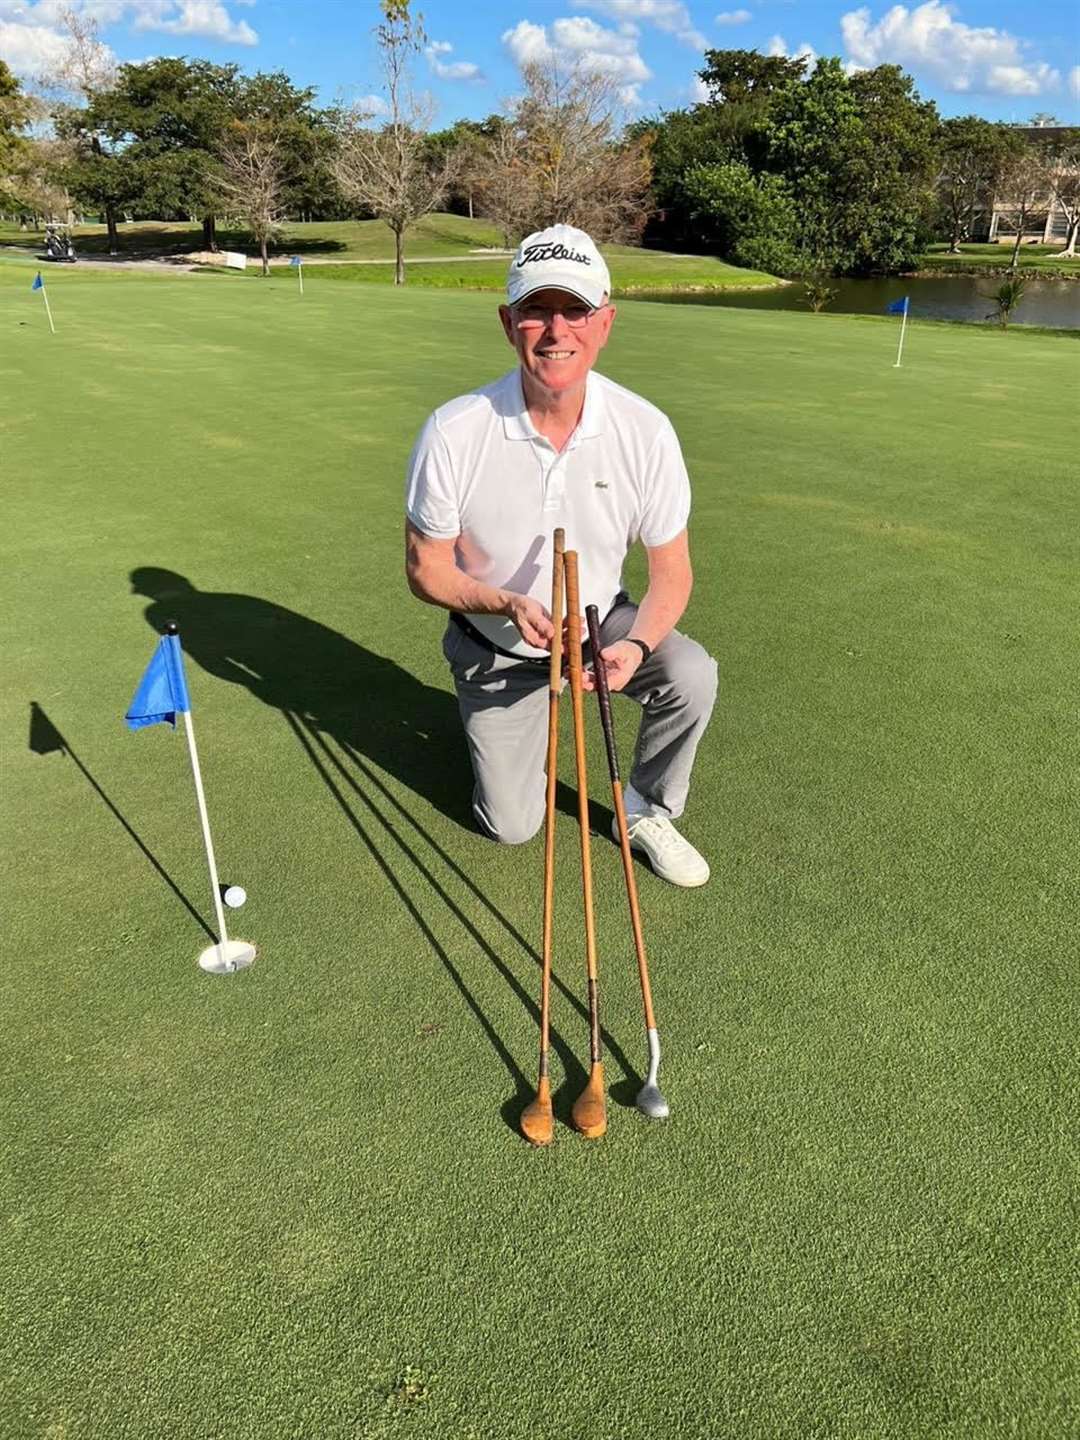 Bill MacDonald with his father's treasured hickory clubs which he is taking with him to the 100th anniversary Texas Open.